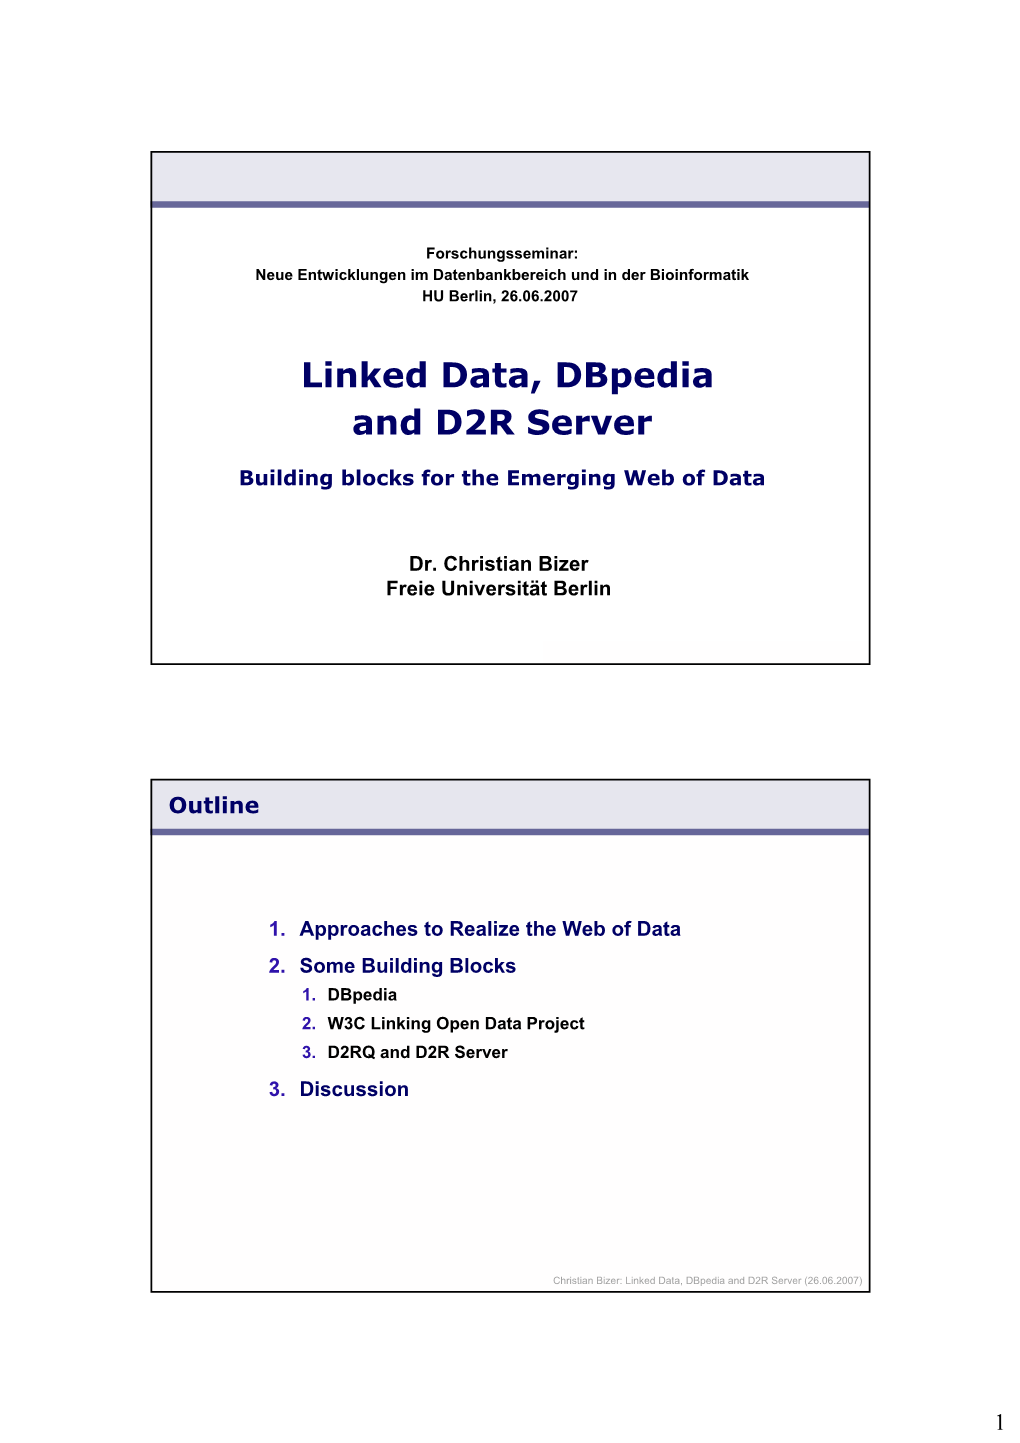 Linked Data, Dbpedia and D2R Server